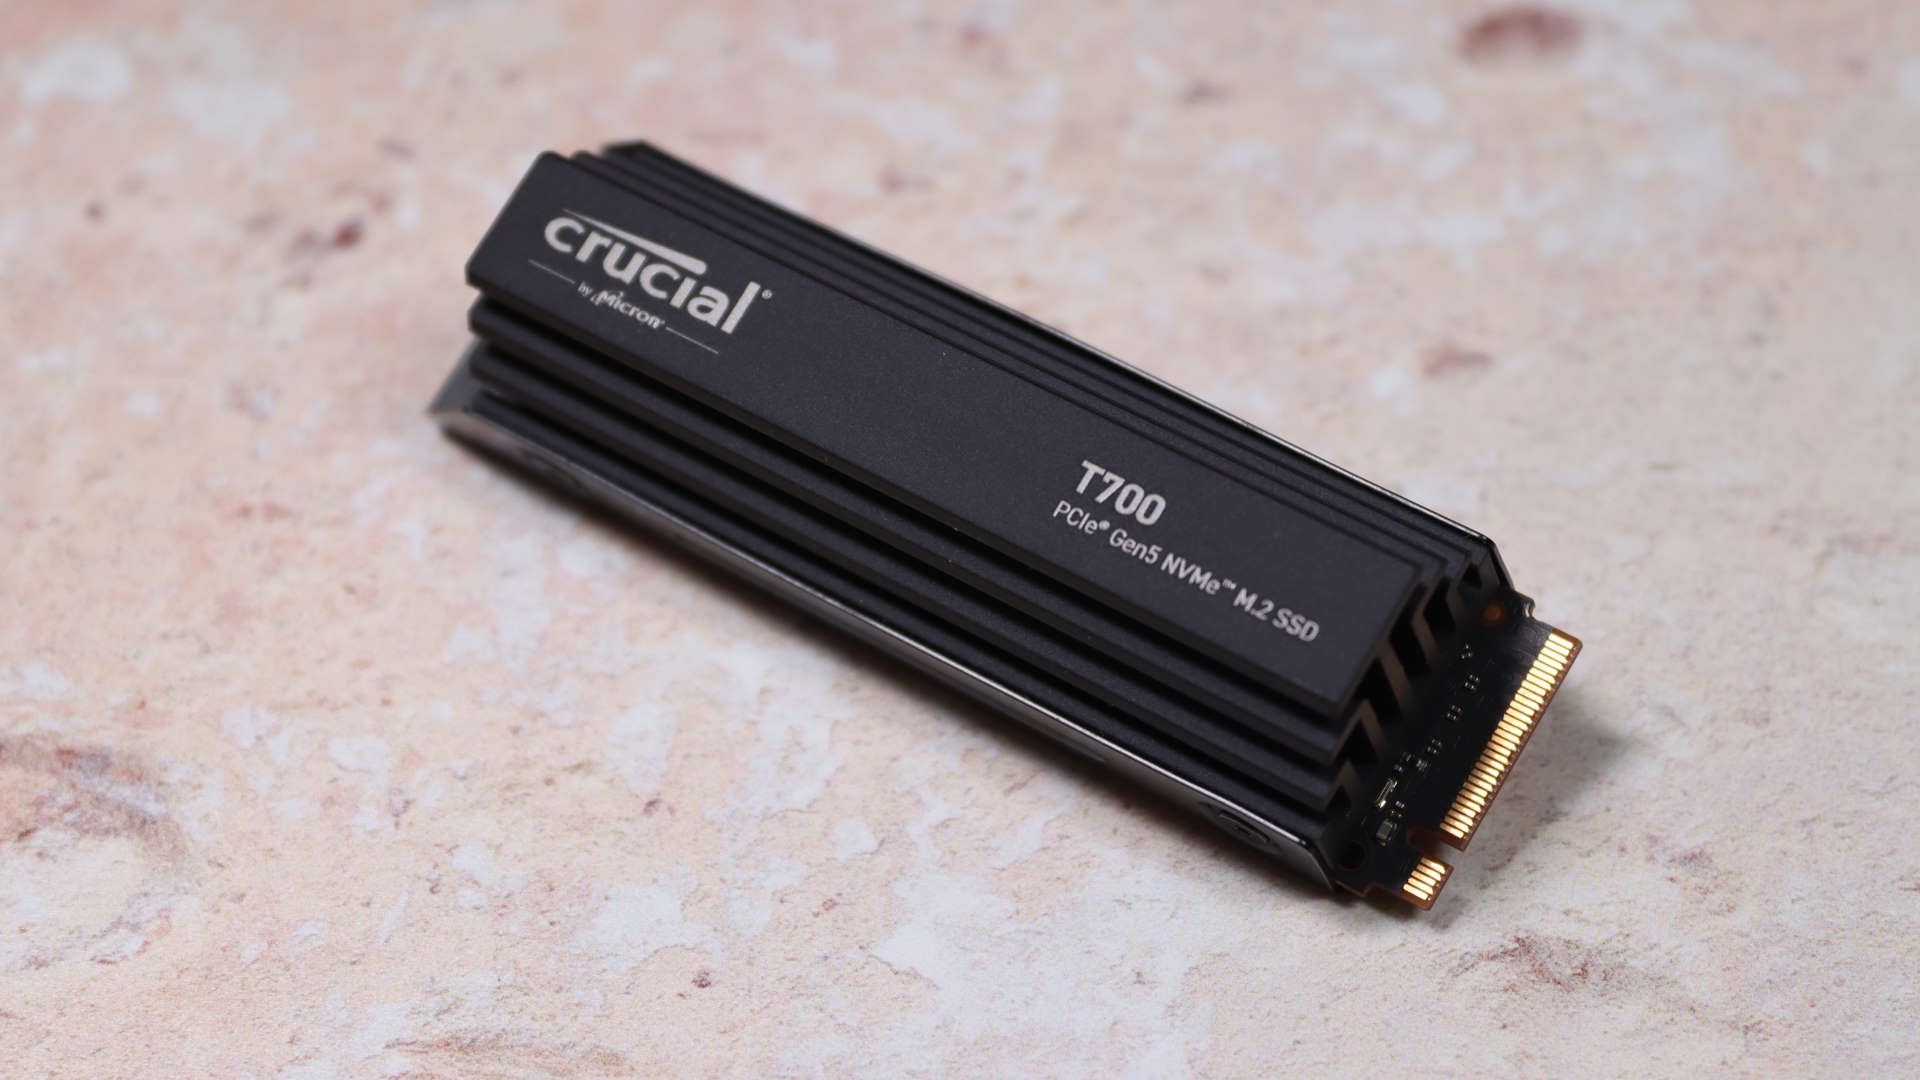 Crucial T700 Review: The Fastest PCIe 5 SSD For Enthusiasts